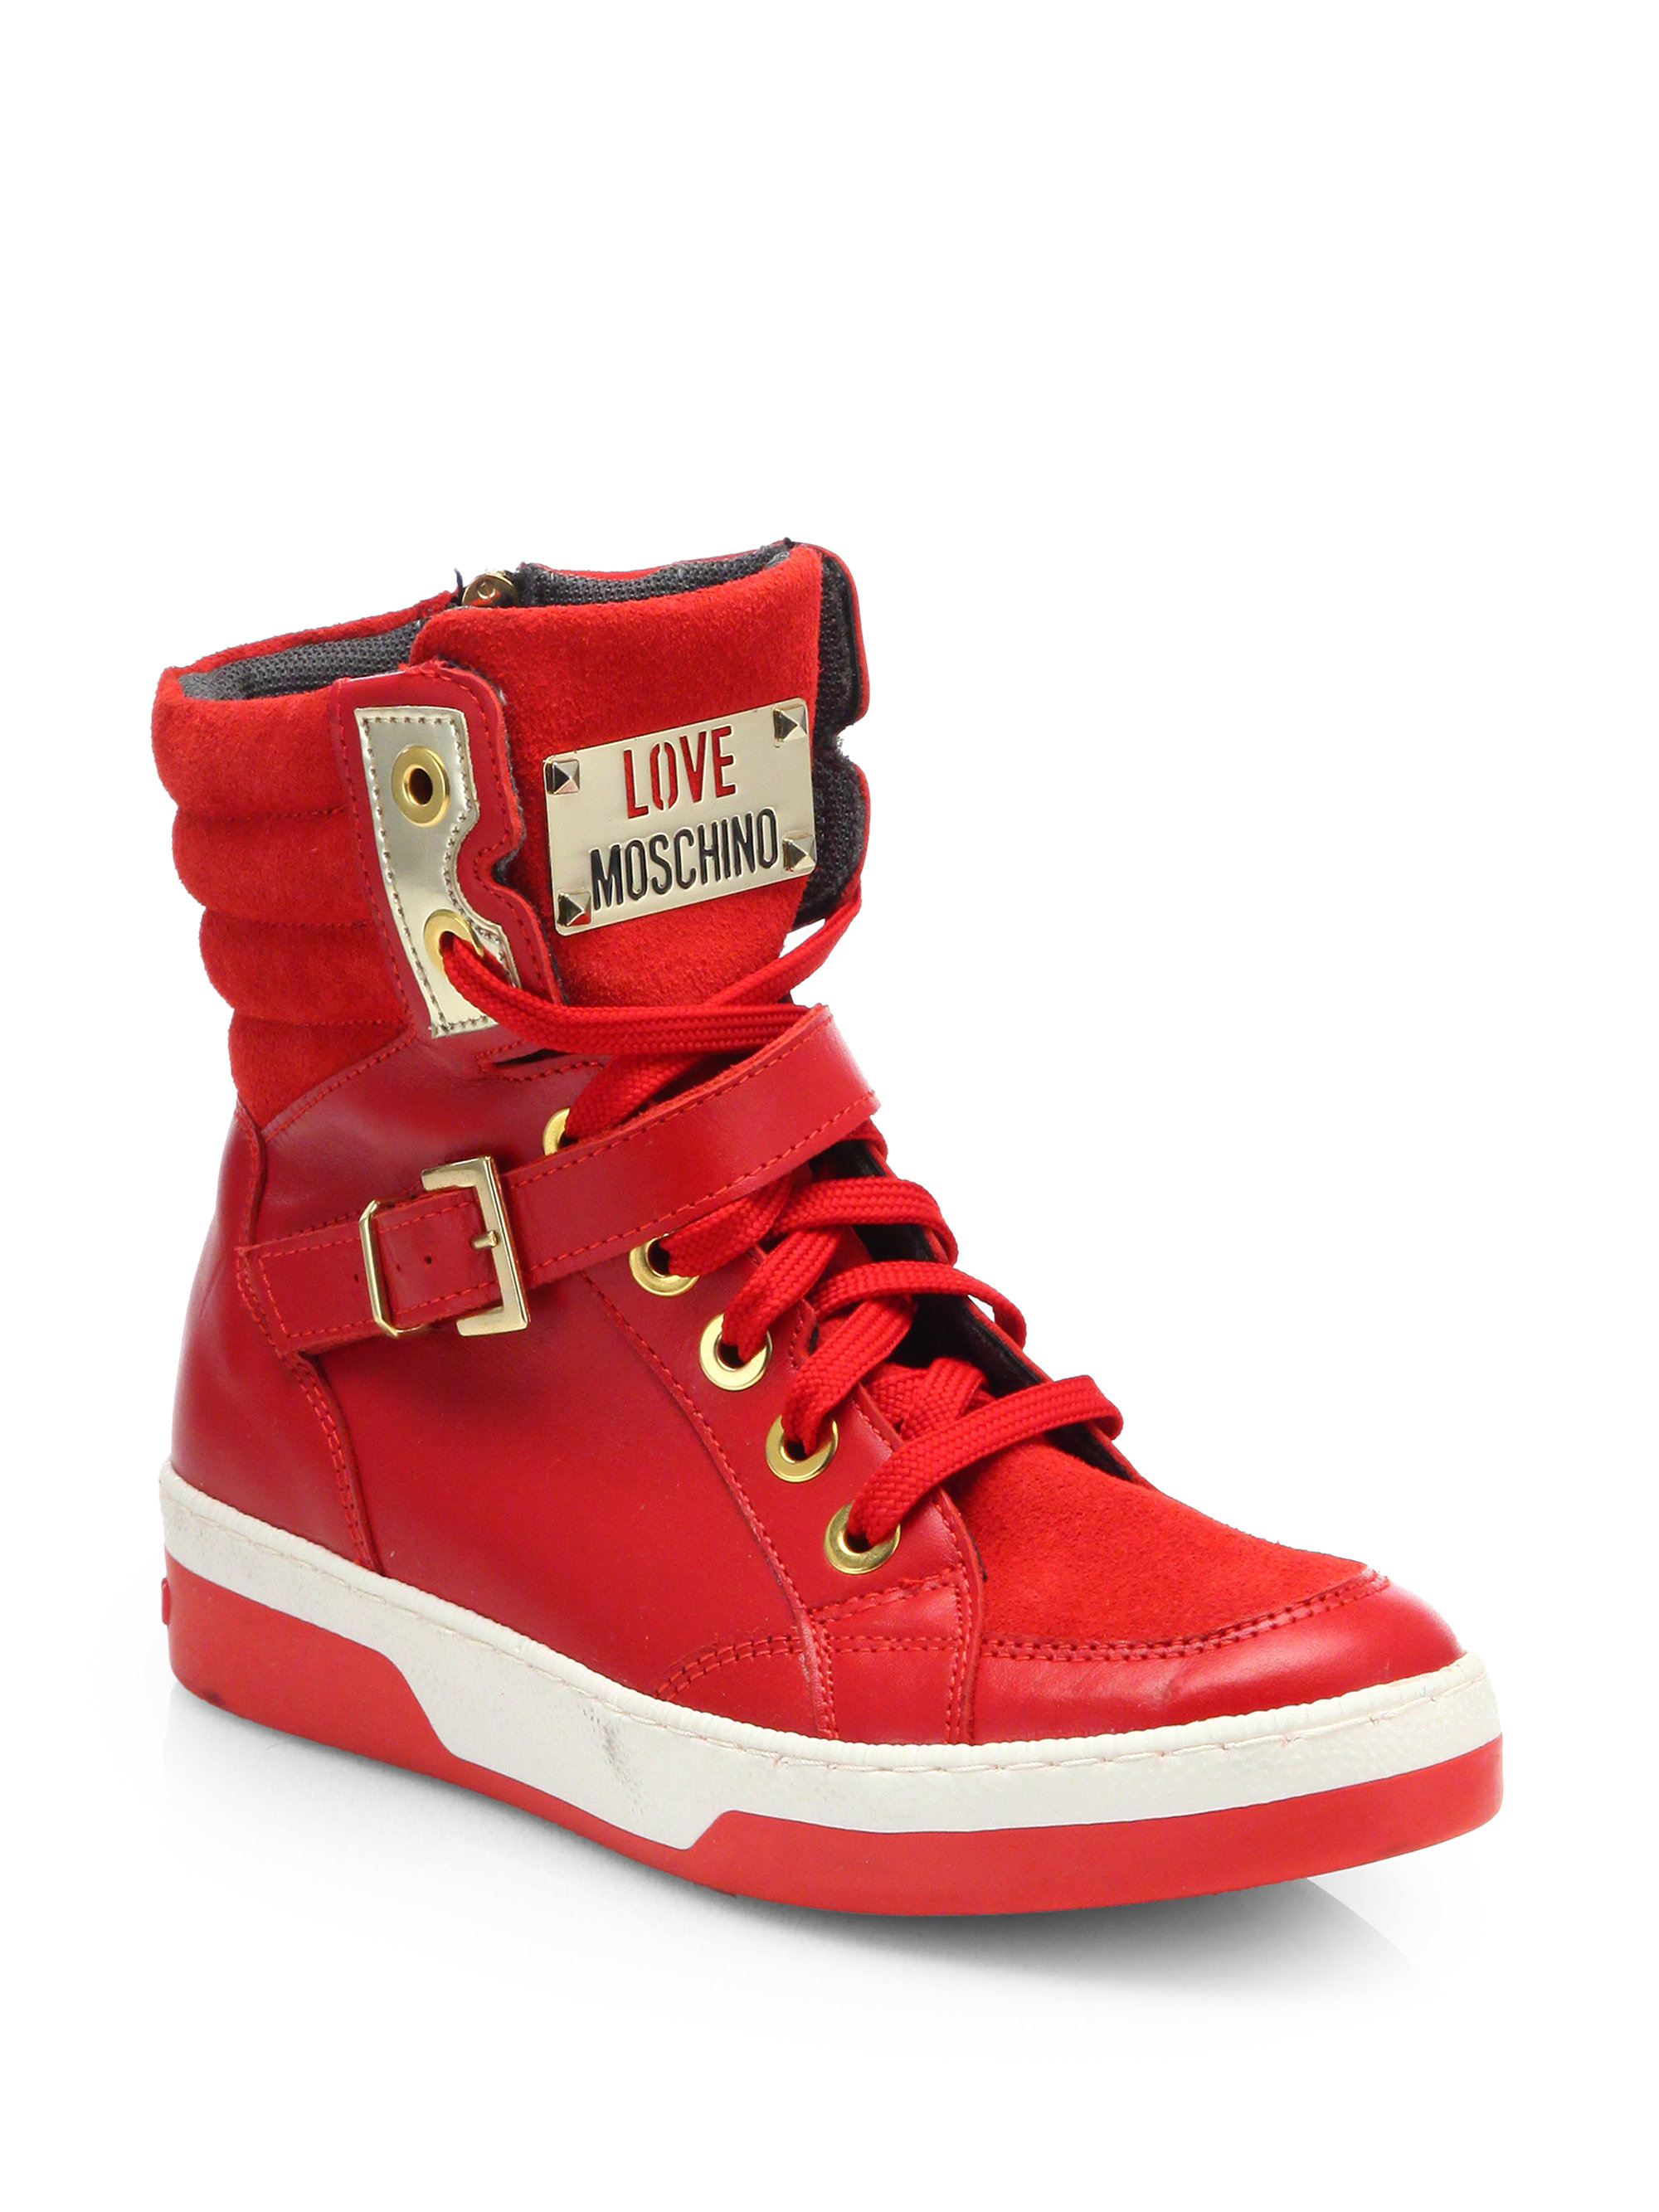 Love Moschino Chain Leather Hightop Sneakers in Red - Lyst